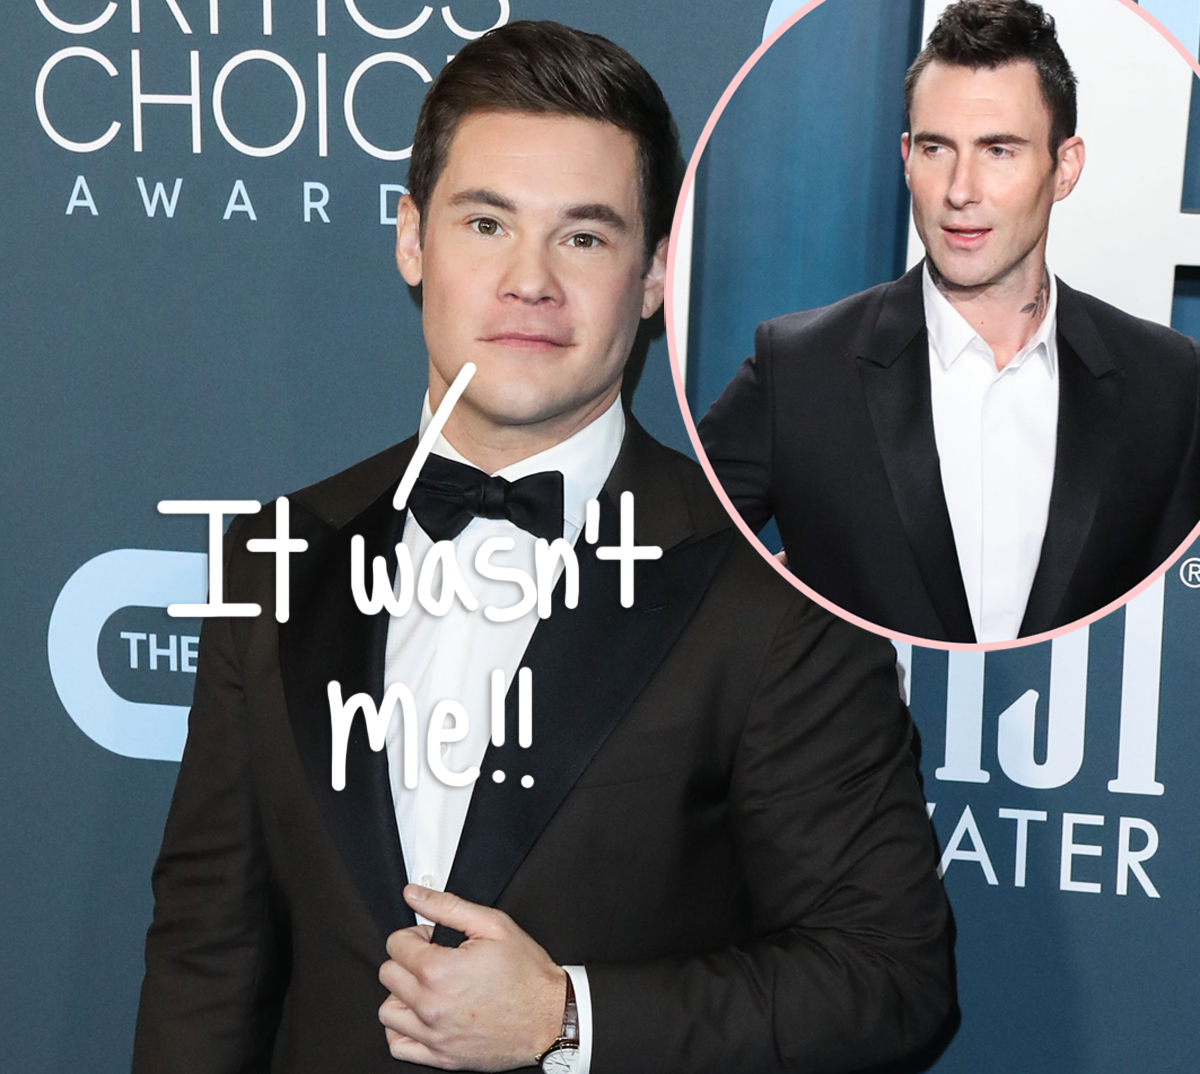 #Pitch Perfect’s Adam Devine Wants To Make It Clear That He’s ‘Not Adam Levine’ Amid Singer’s Affair Allegations!